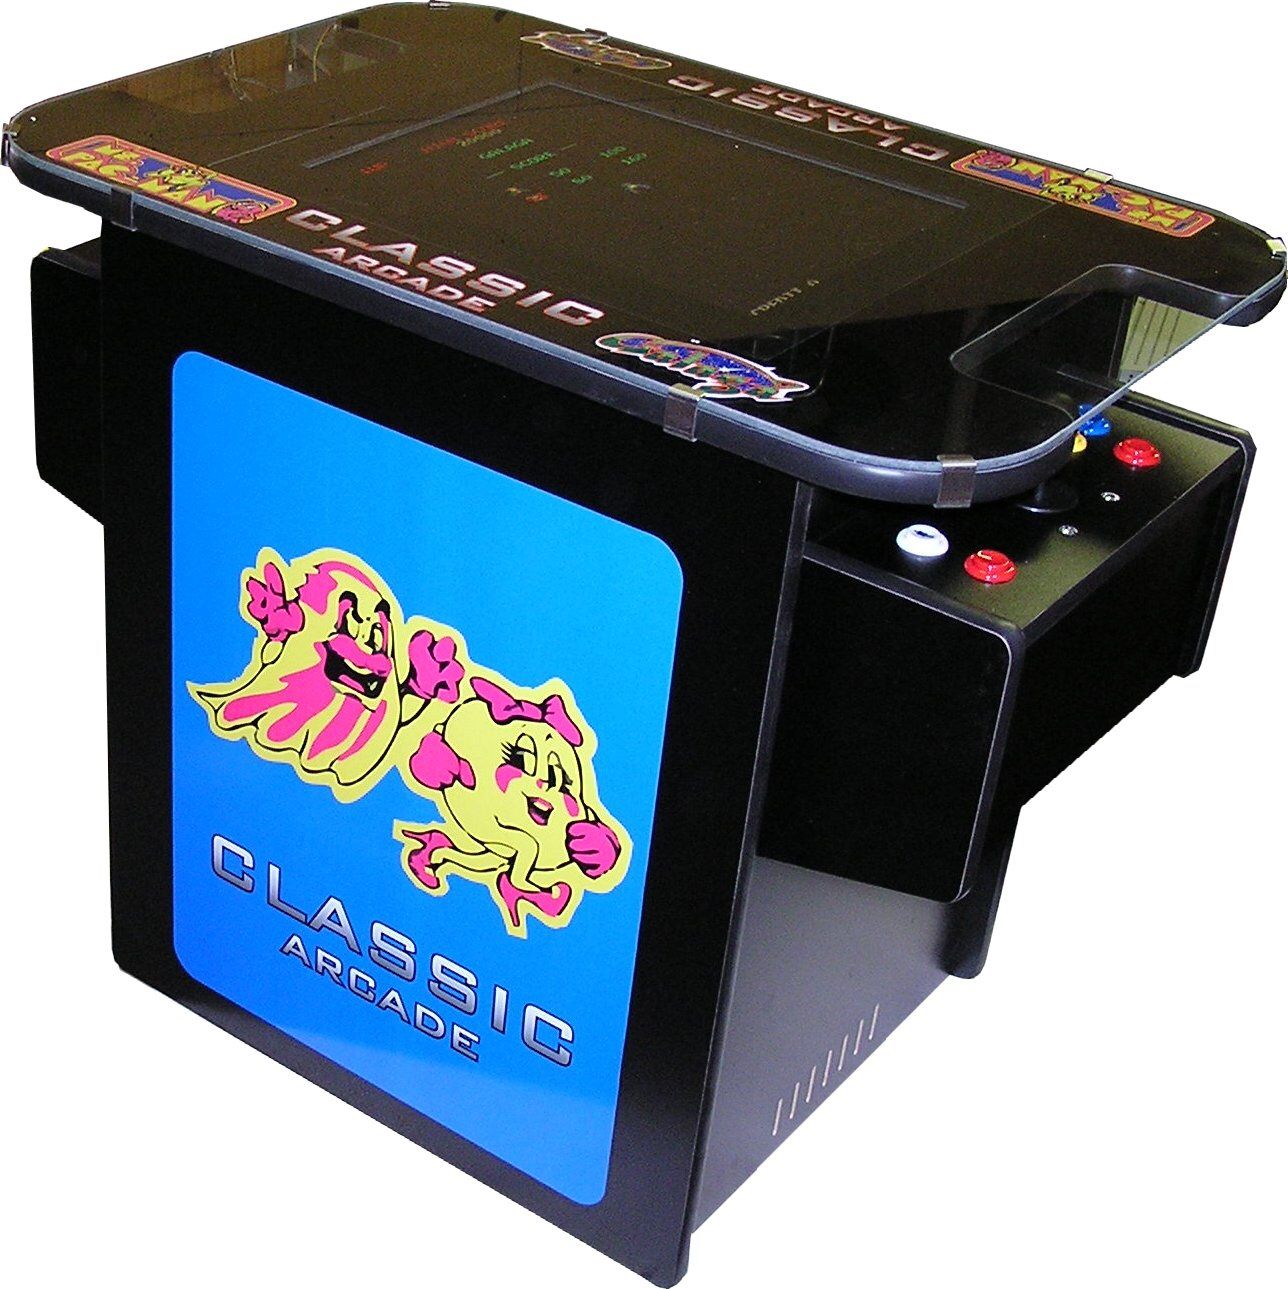 Ms PAC Man, Galaga, Centipede, Frogger and more